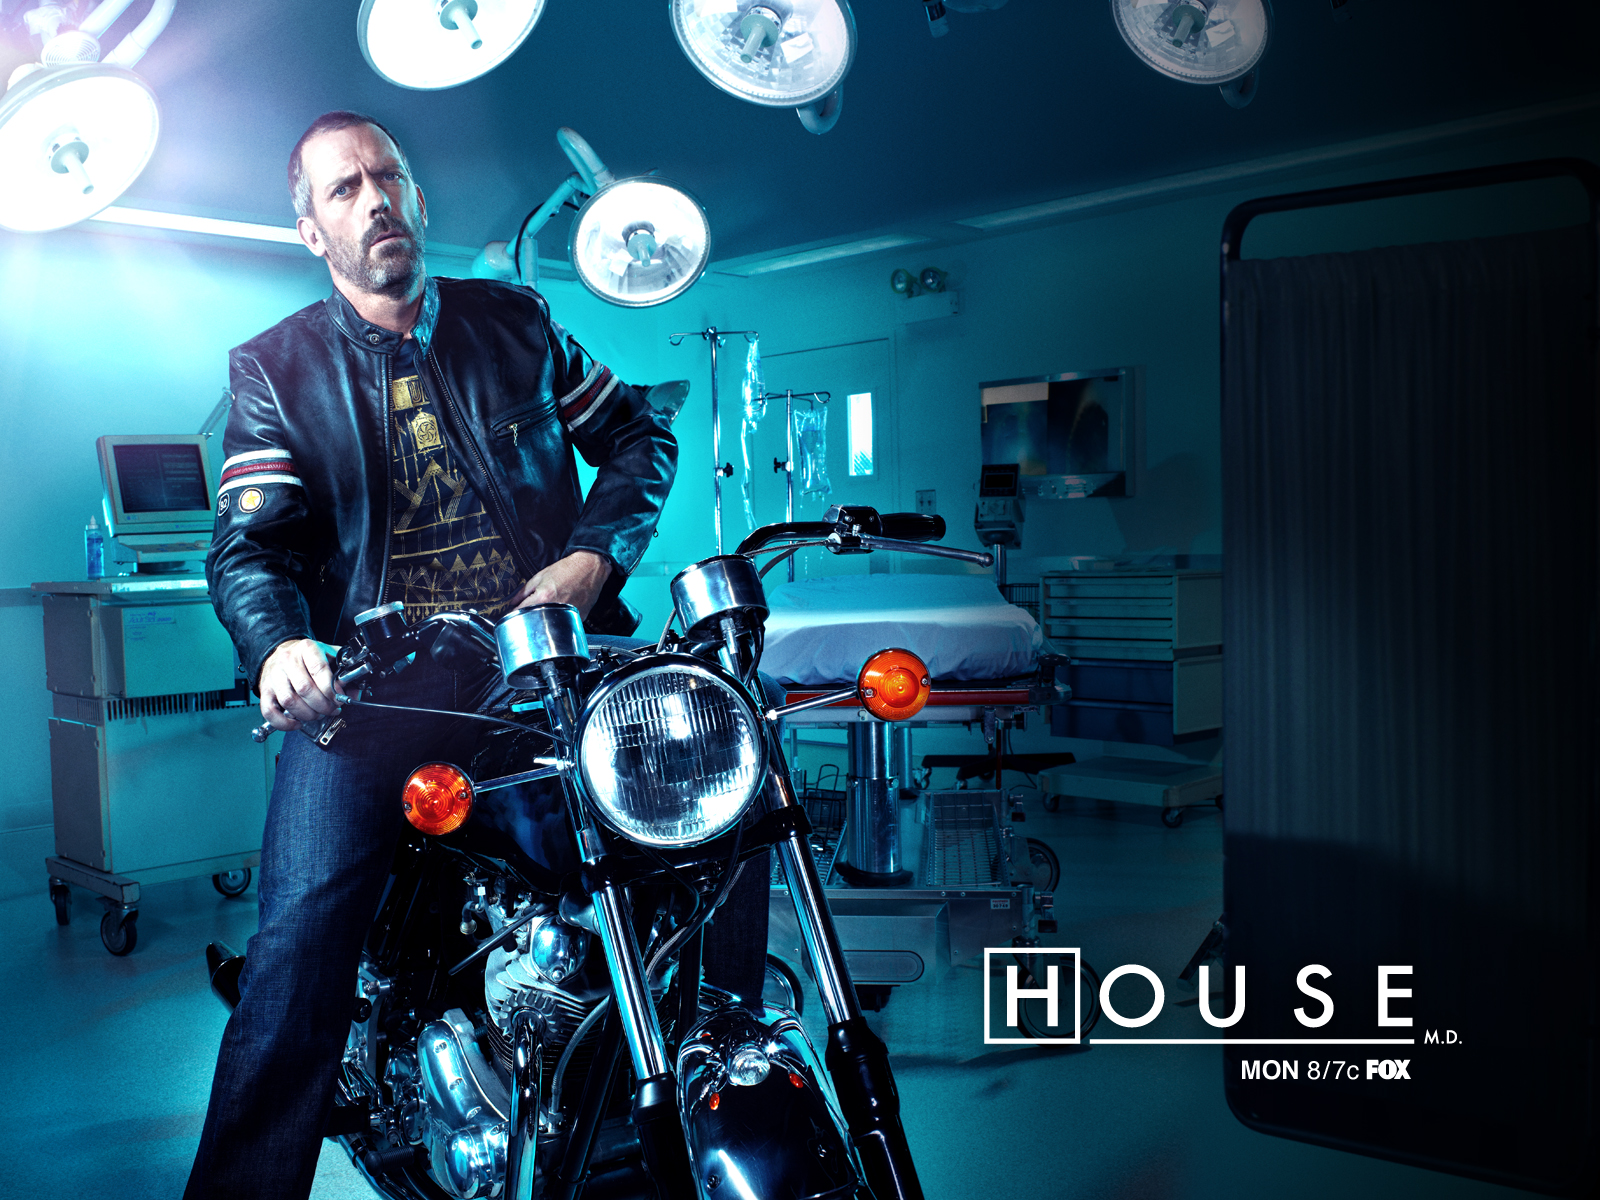 Download HQ moto in operating House M.D. wallpaper / 1600x1200